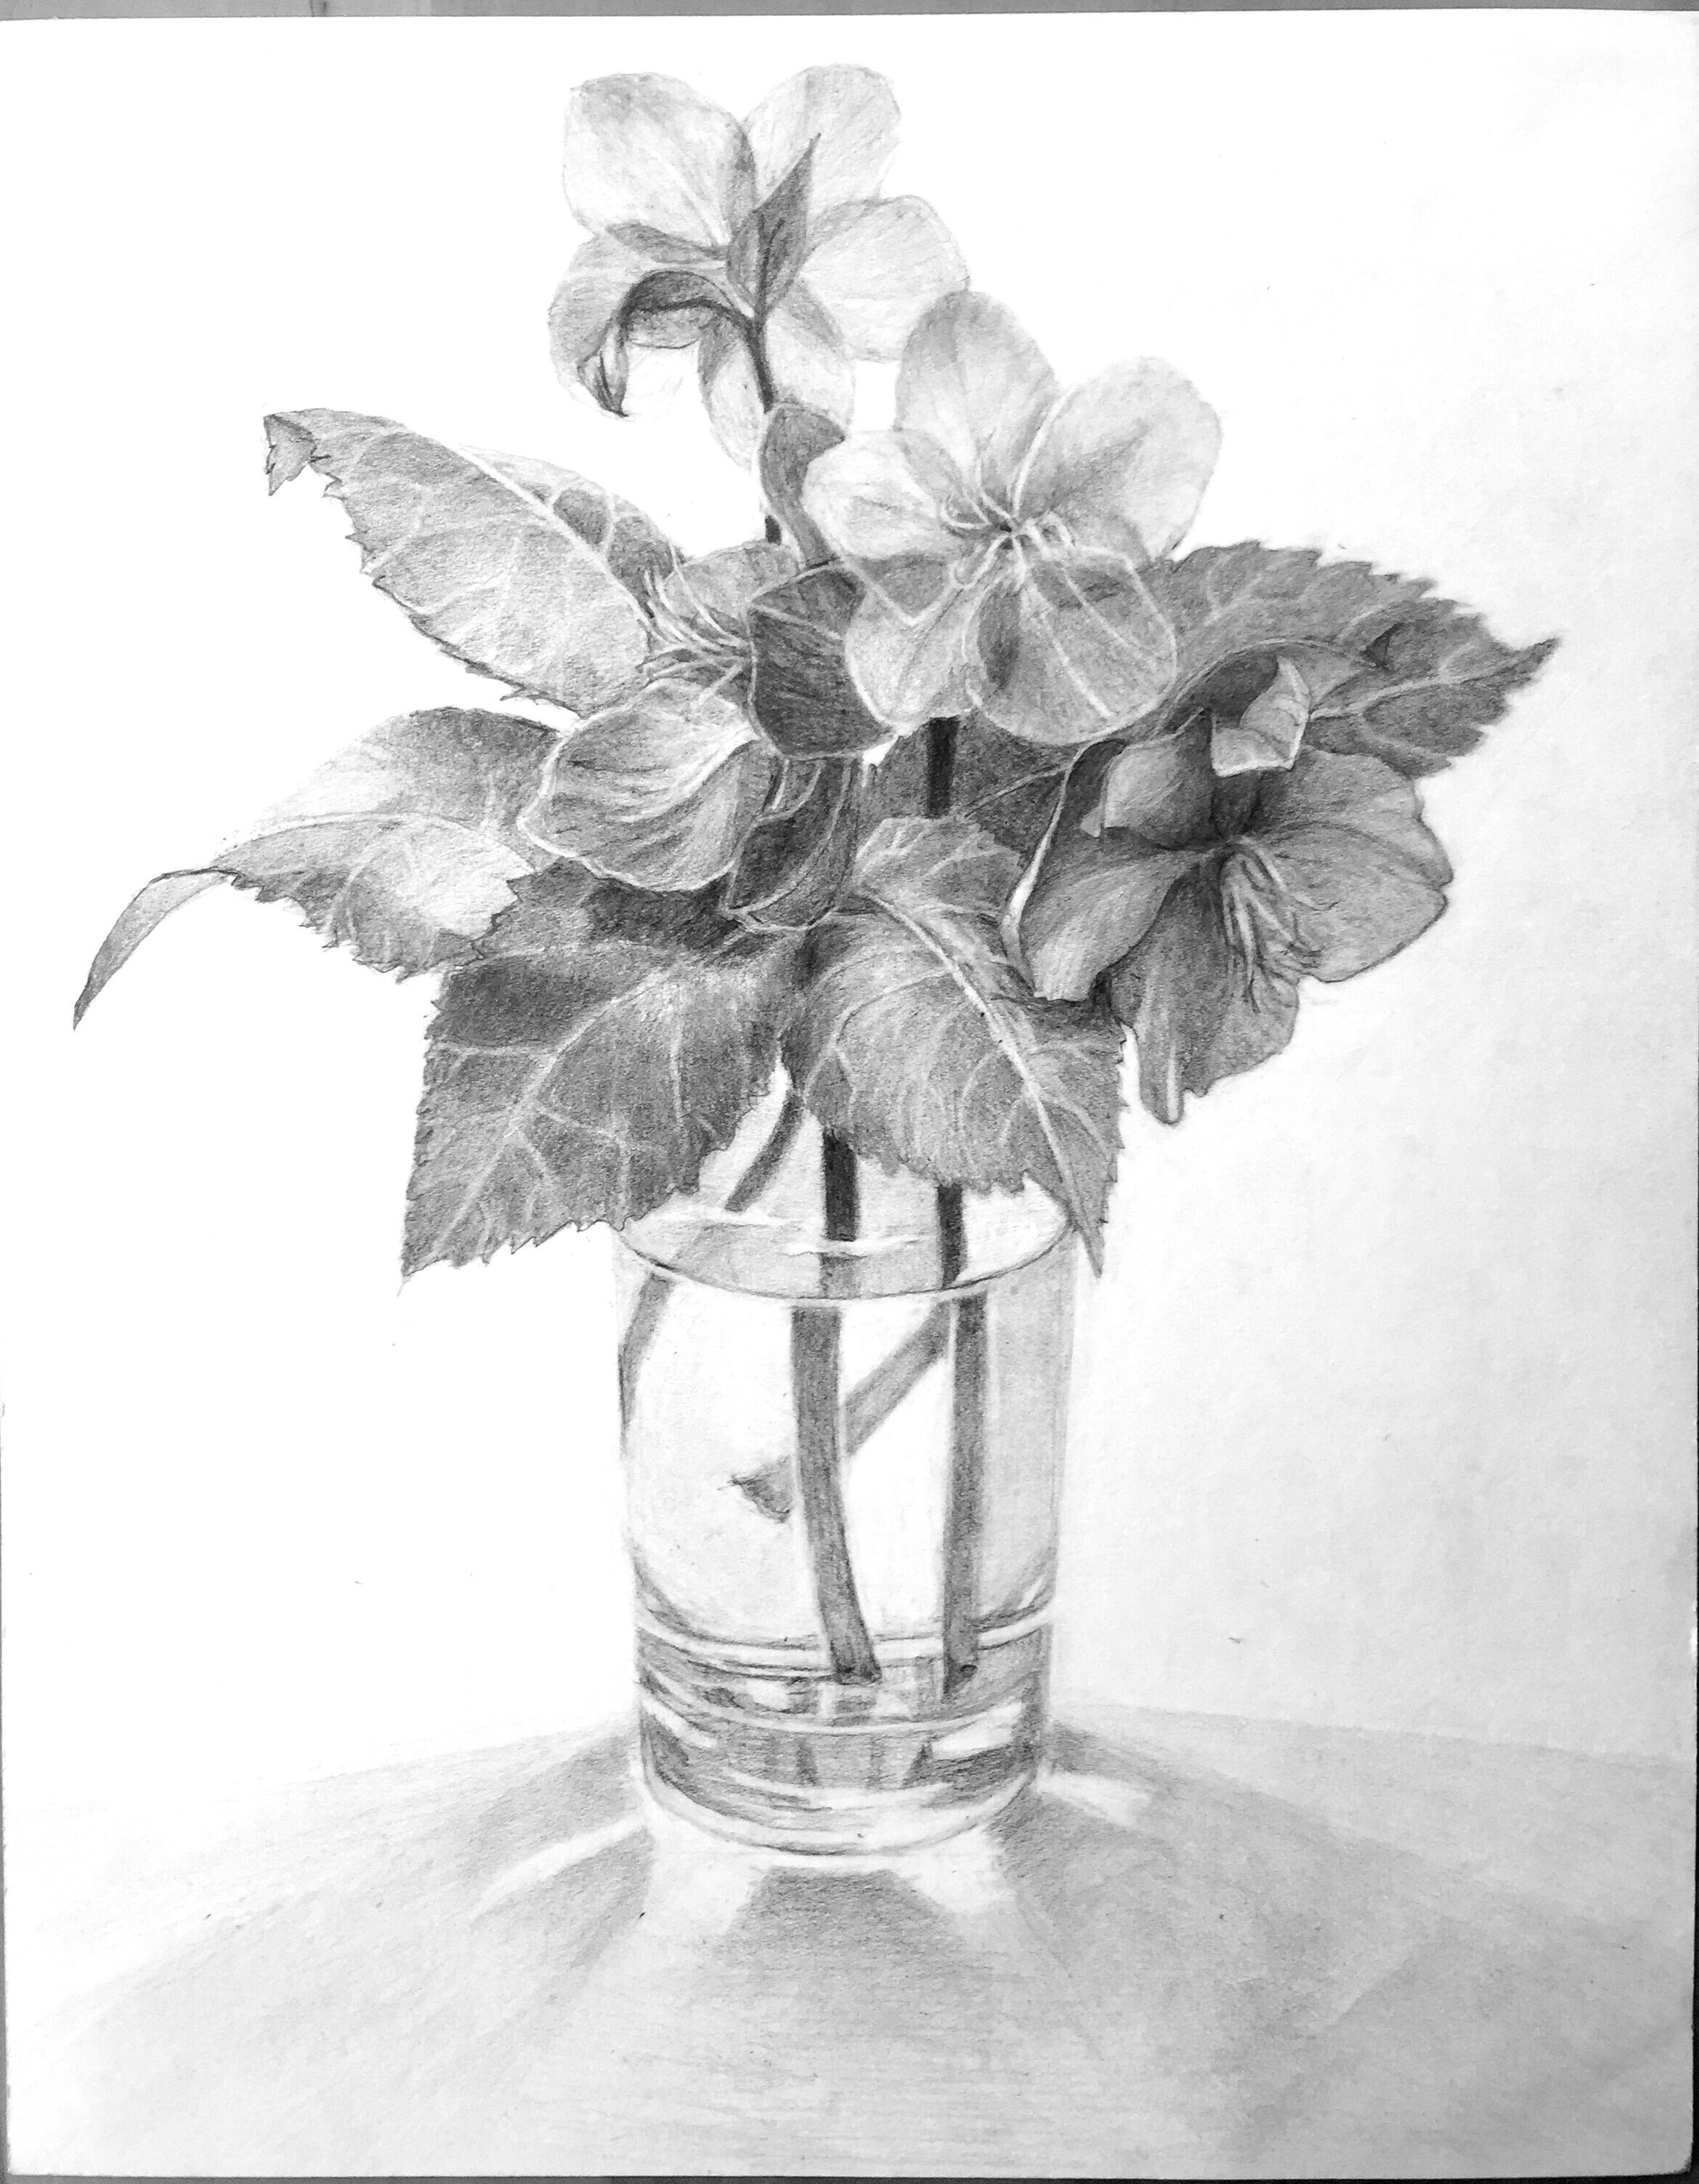 Late Helebores 13.5” x 11”